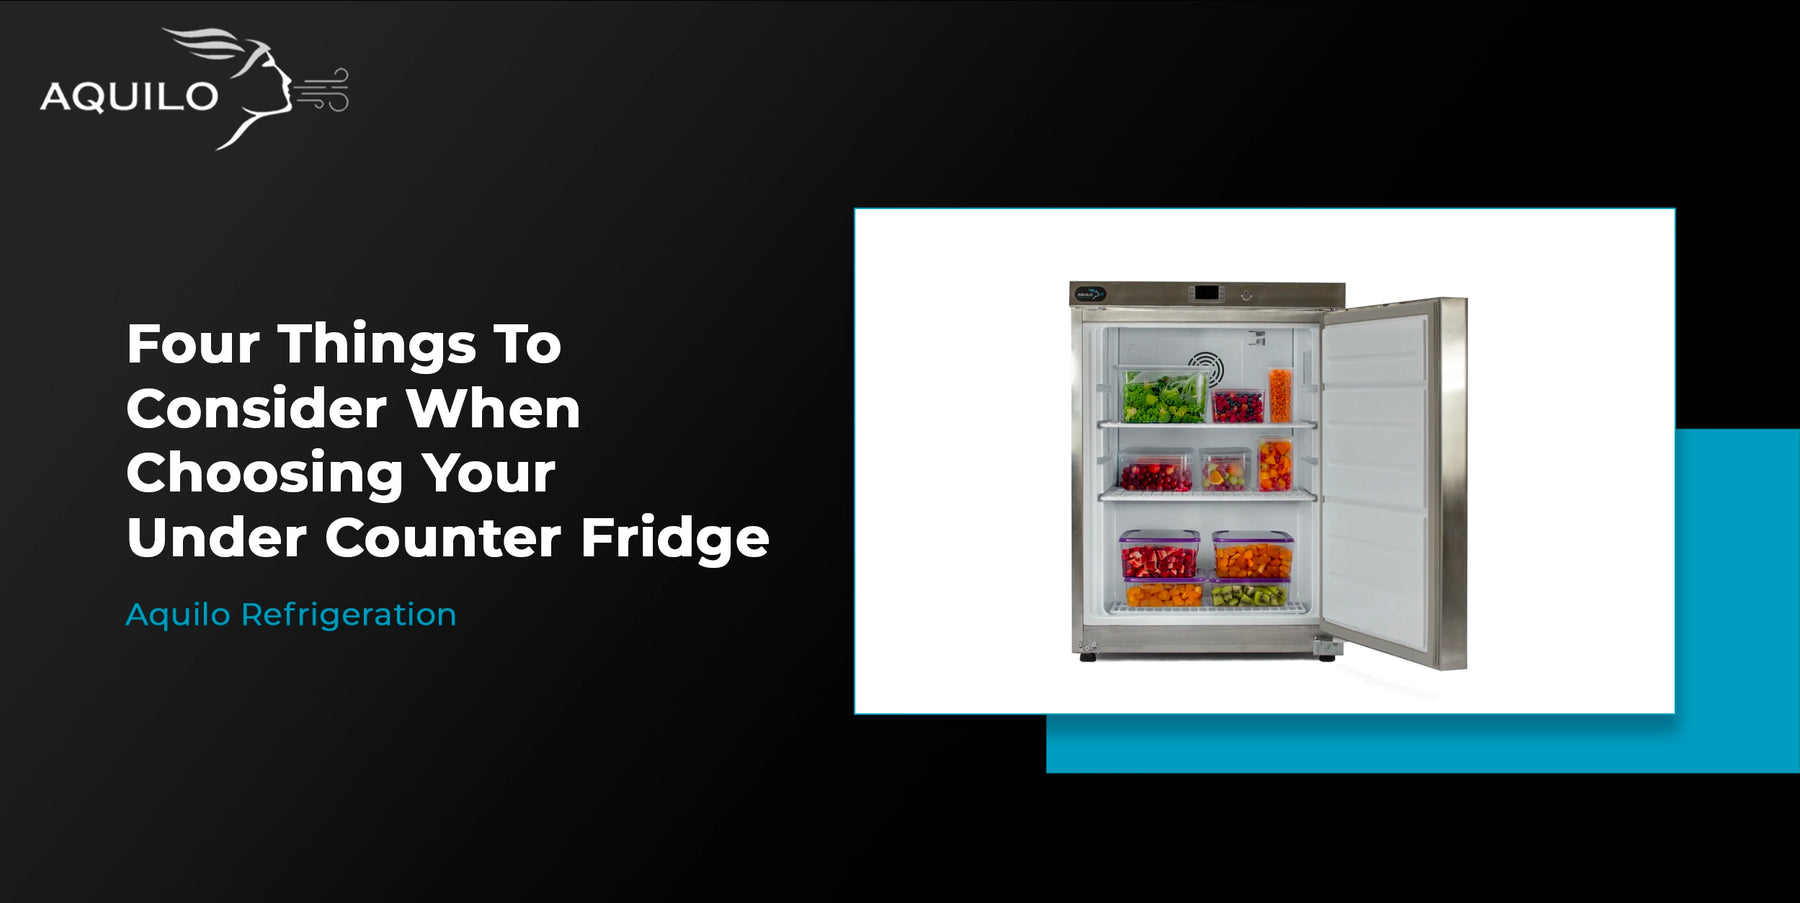 Four Things To Consider When Choosing Your Undercounter Fridge